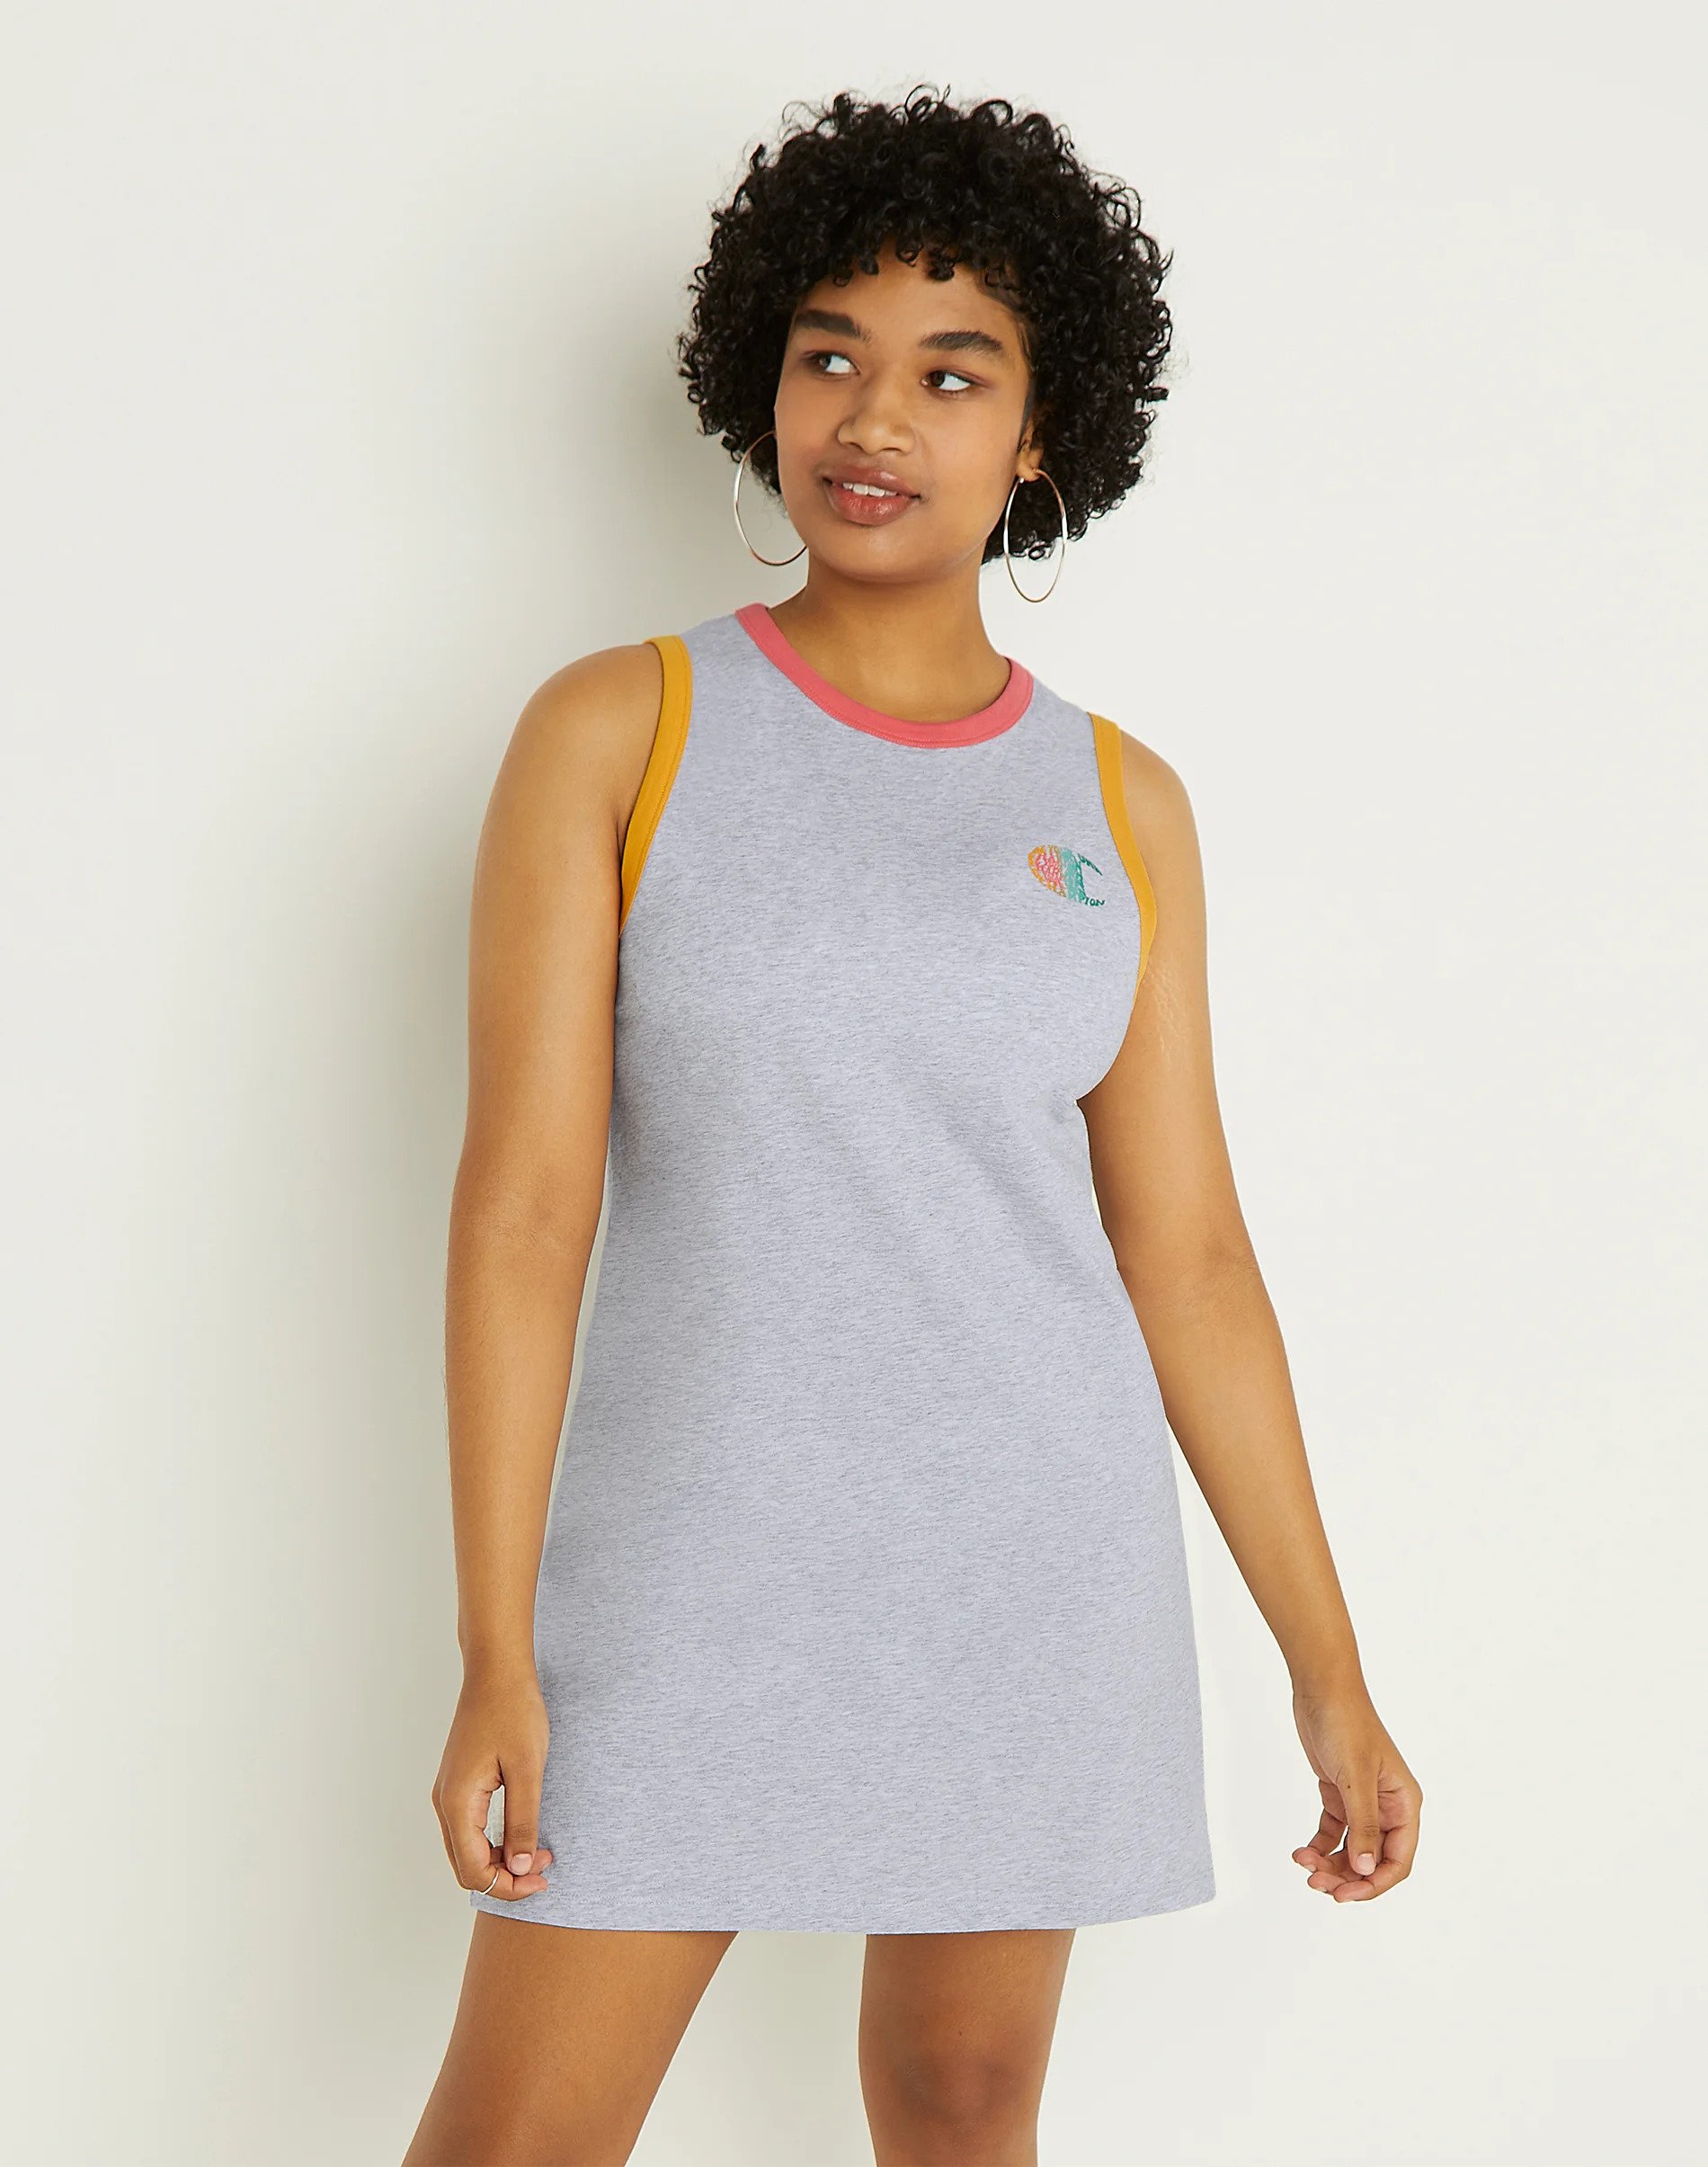 An ad for Champion depicting a model wearing the Campus Tank Dress. Be your own Champion in the size Small and the Oxford Grey Heather/Multi color.